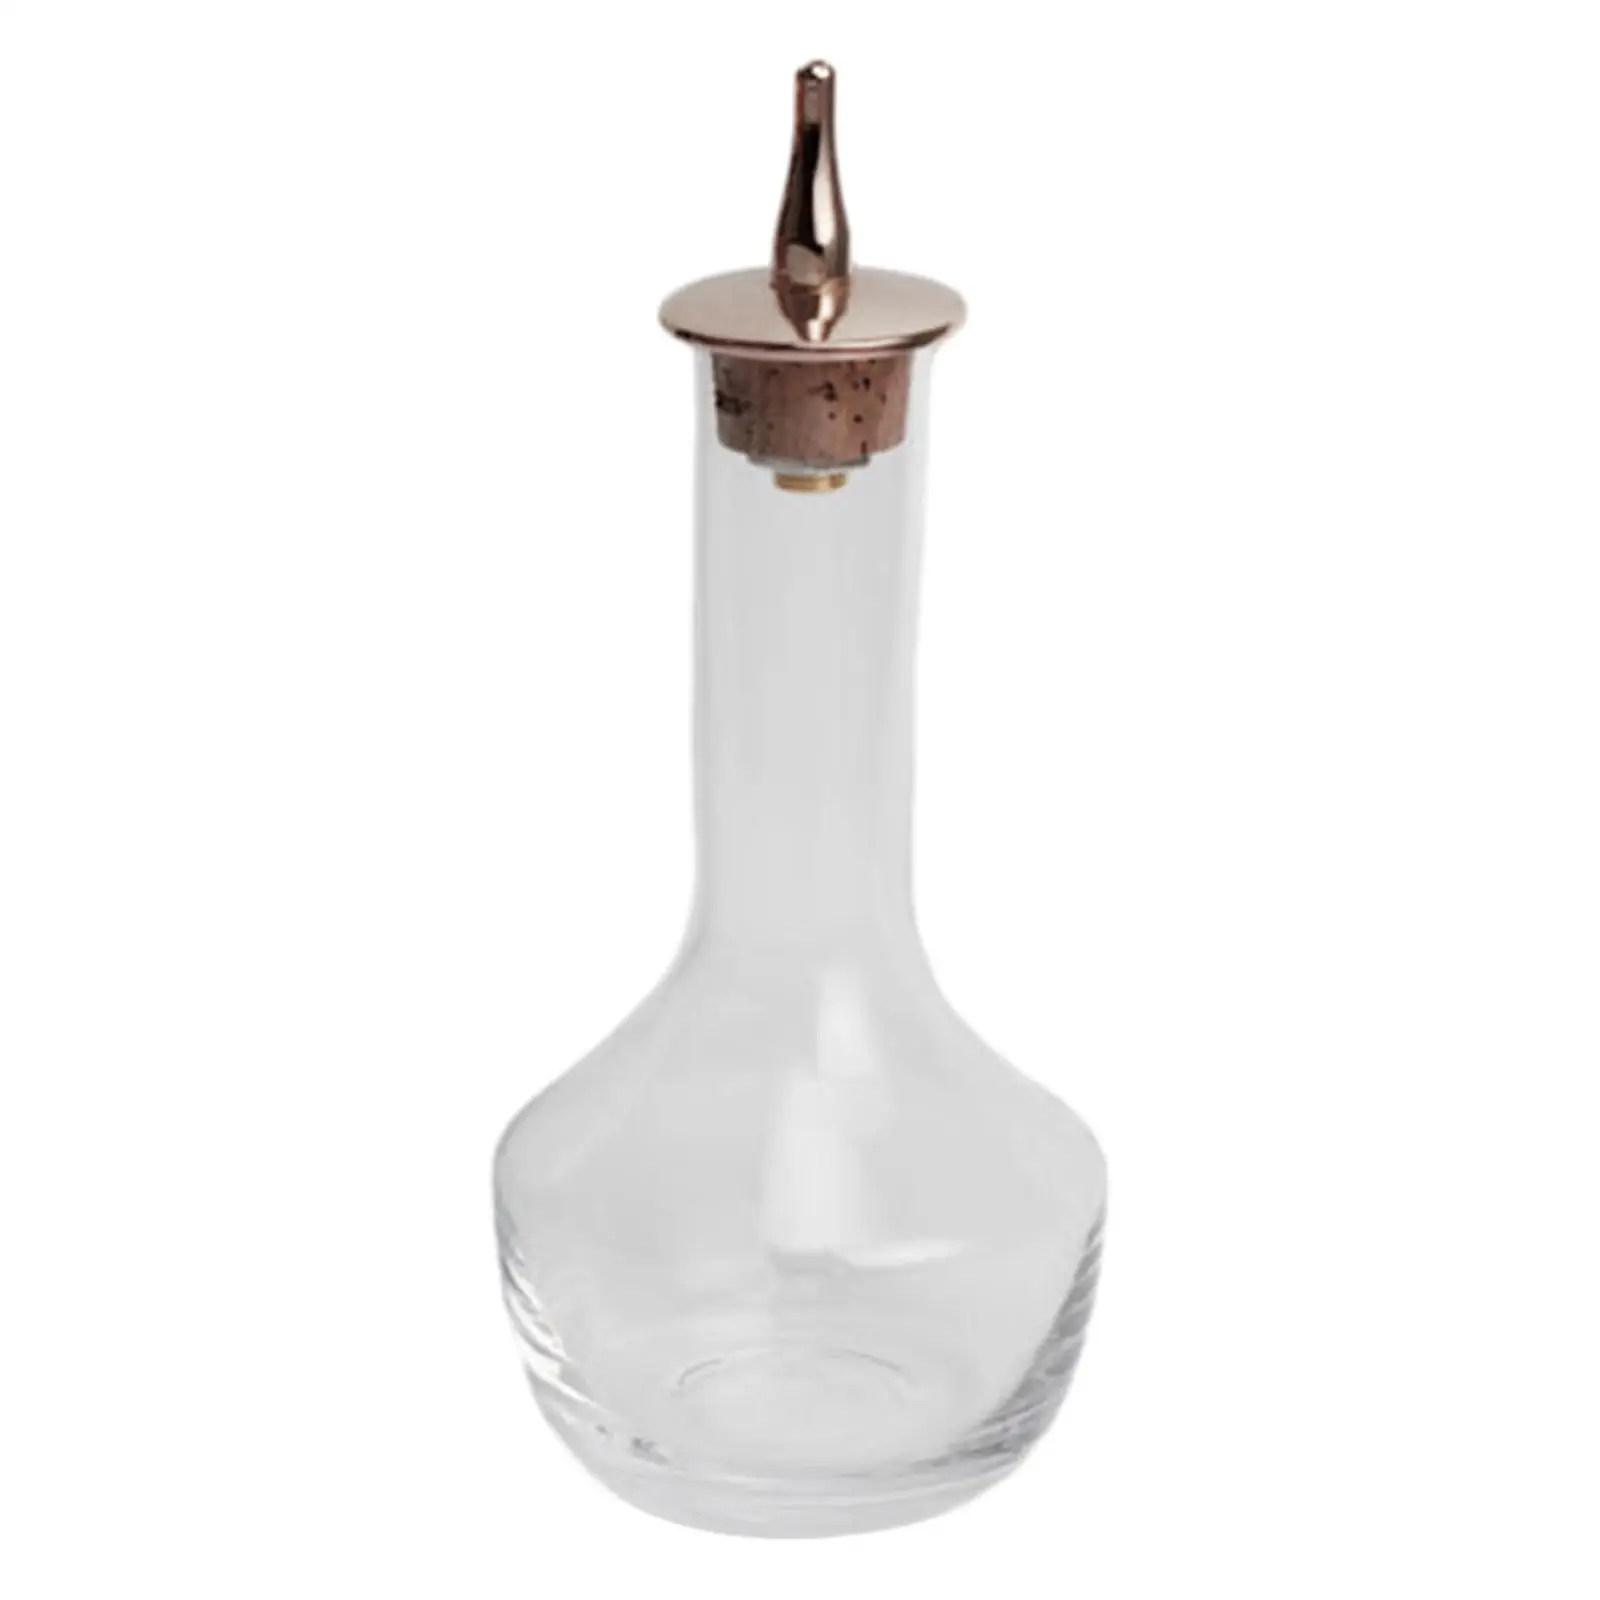 Japanese Style Bitter Bottle with Stopper 1.7oz Honey Pot Barware for Mixing Drinks Dispenser Making Cocktail Accessories Bar